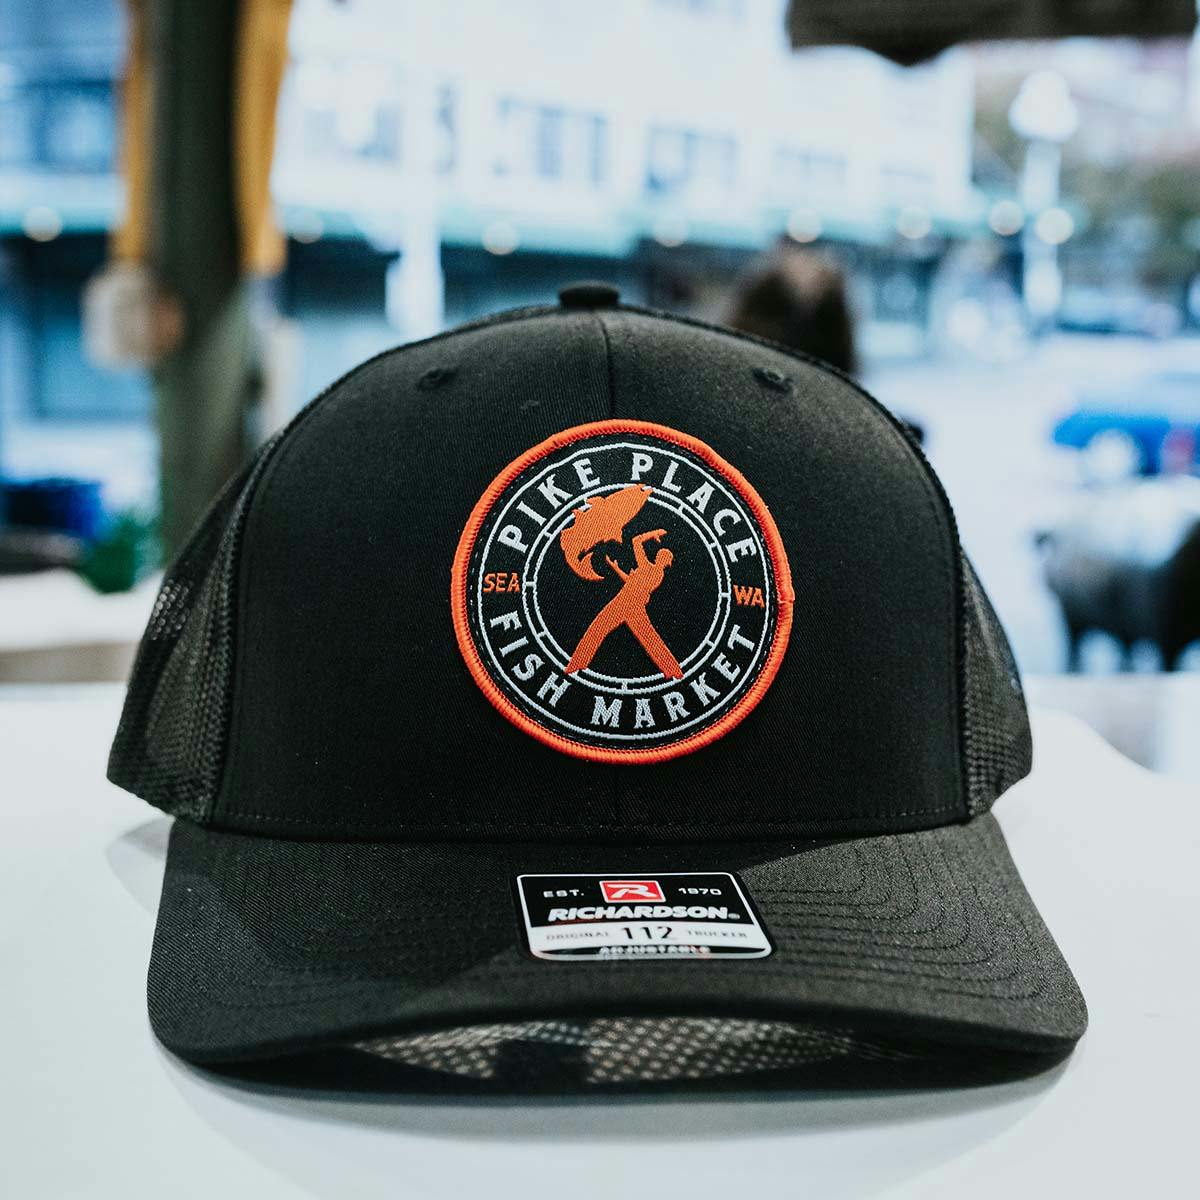 Pike Place Fish Market - Black Mesh Curved Bill Hat